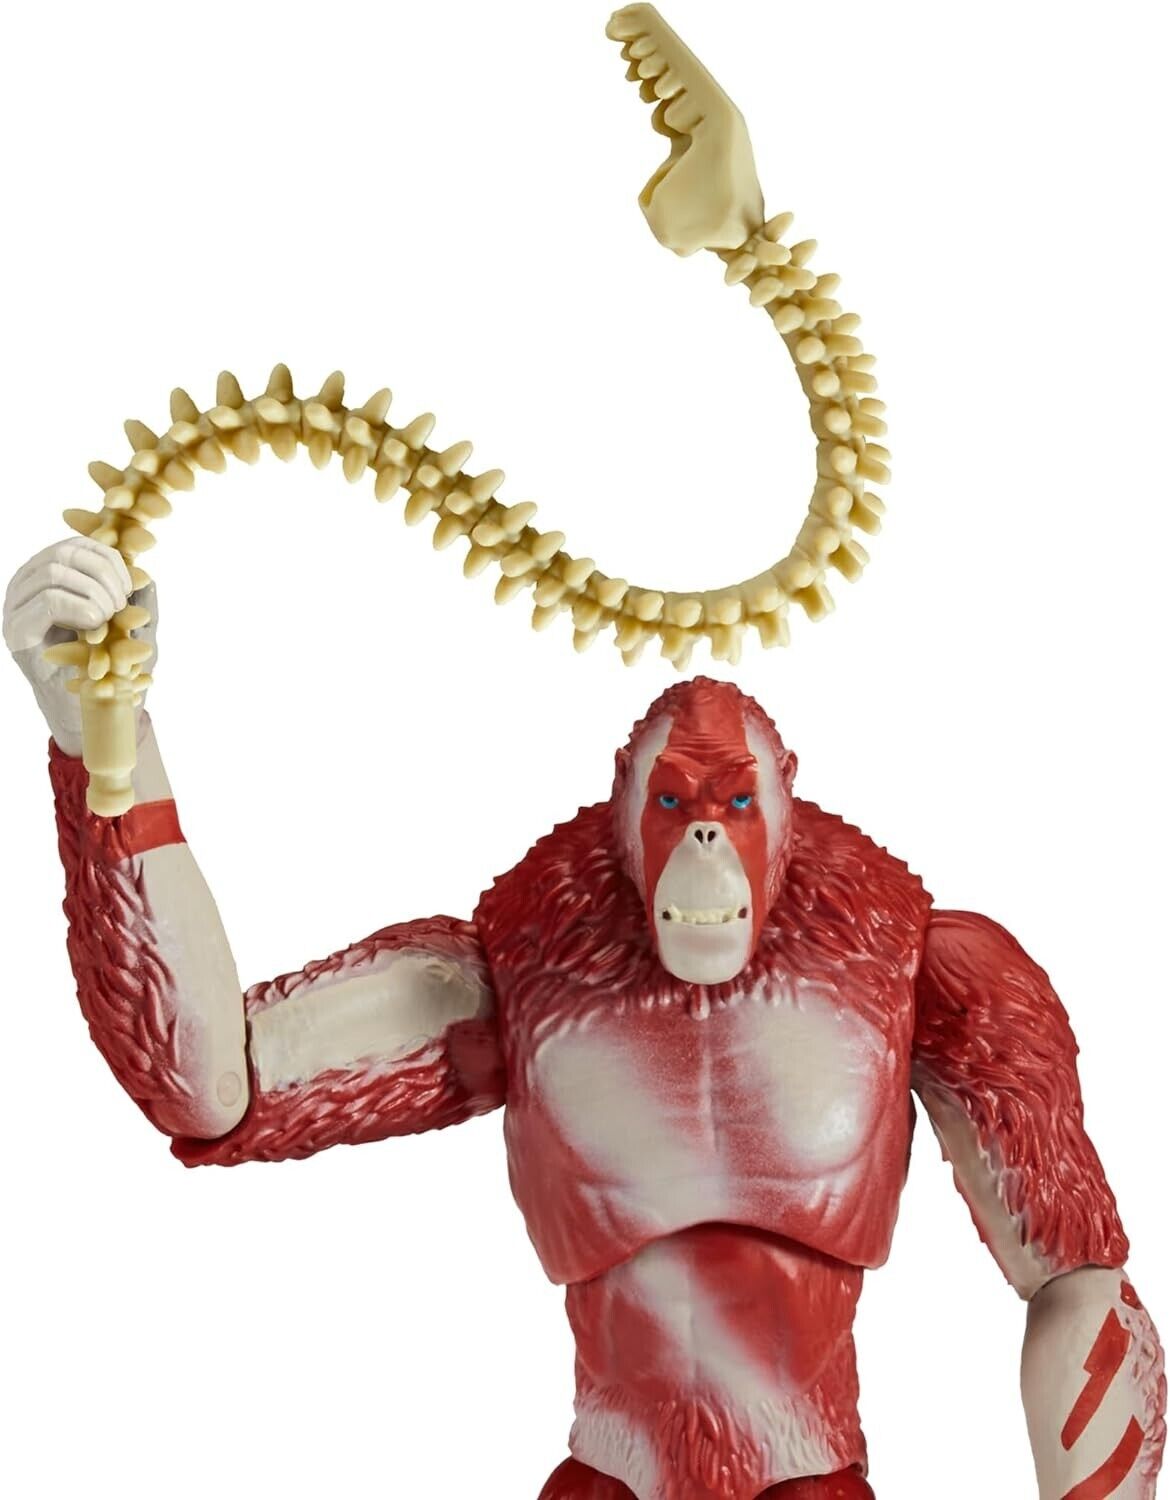 Godzilla x Kong: The New Empire, 6-Inch Skar King Action Figure Toy, Iconic Coll